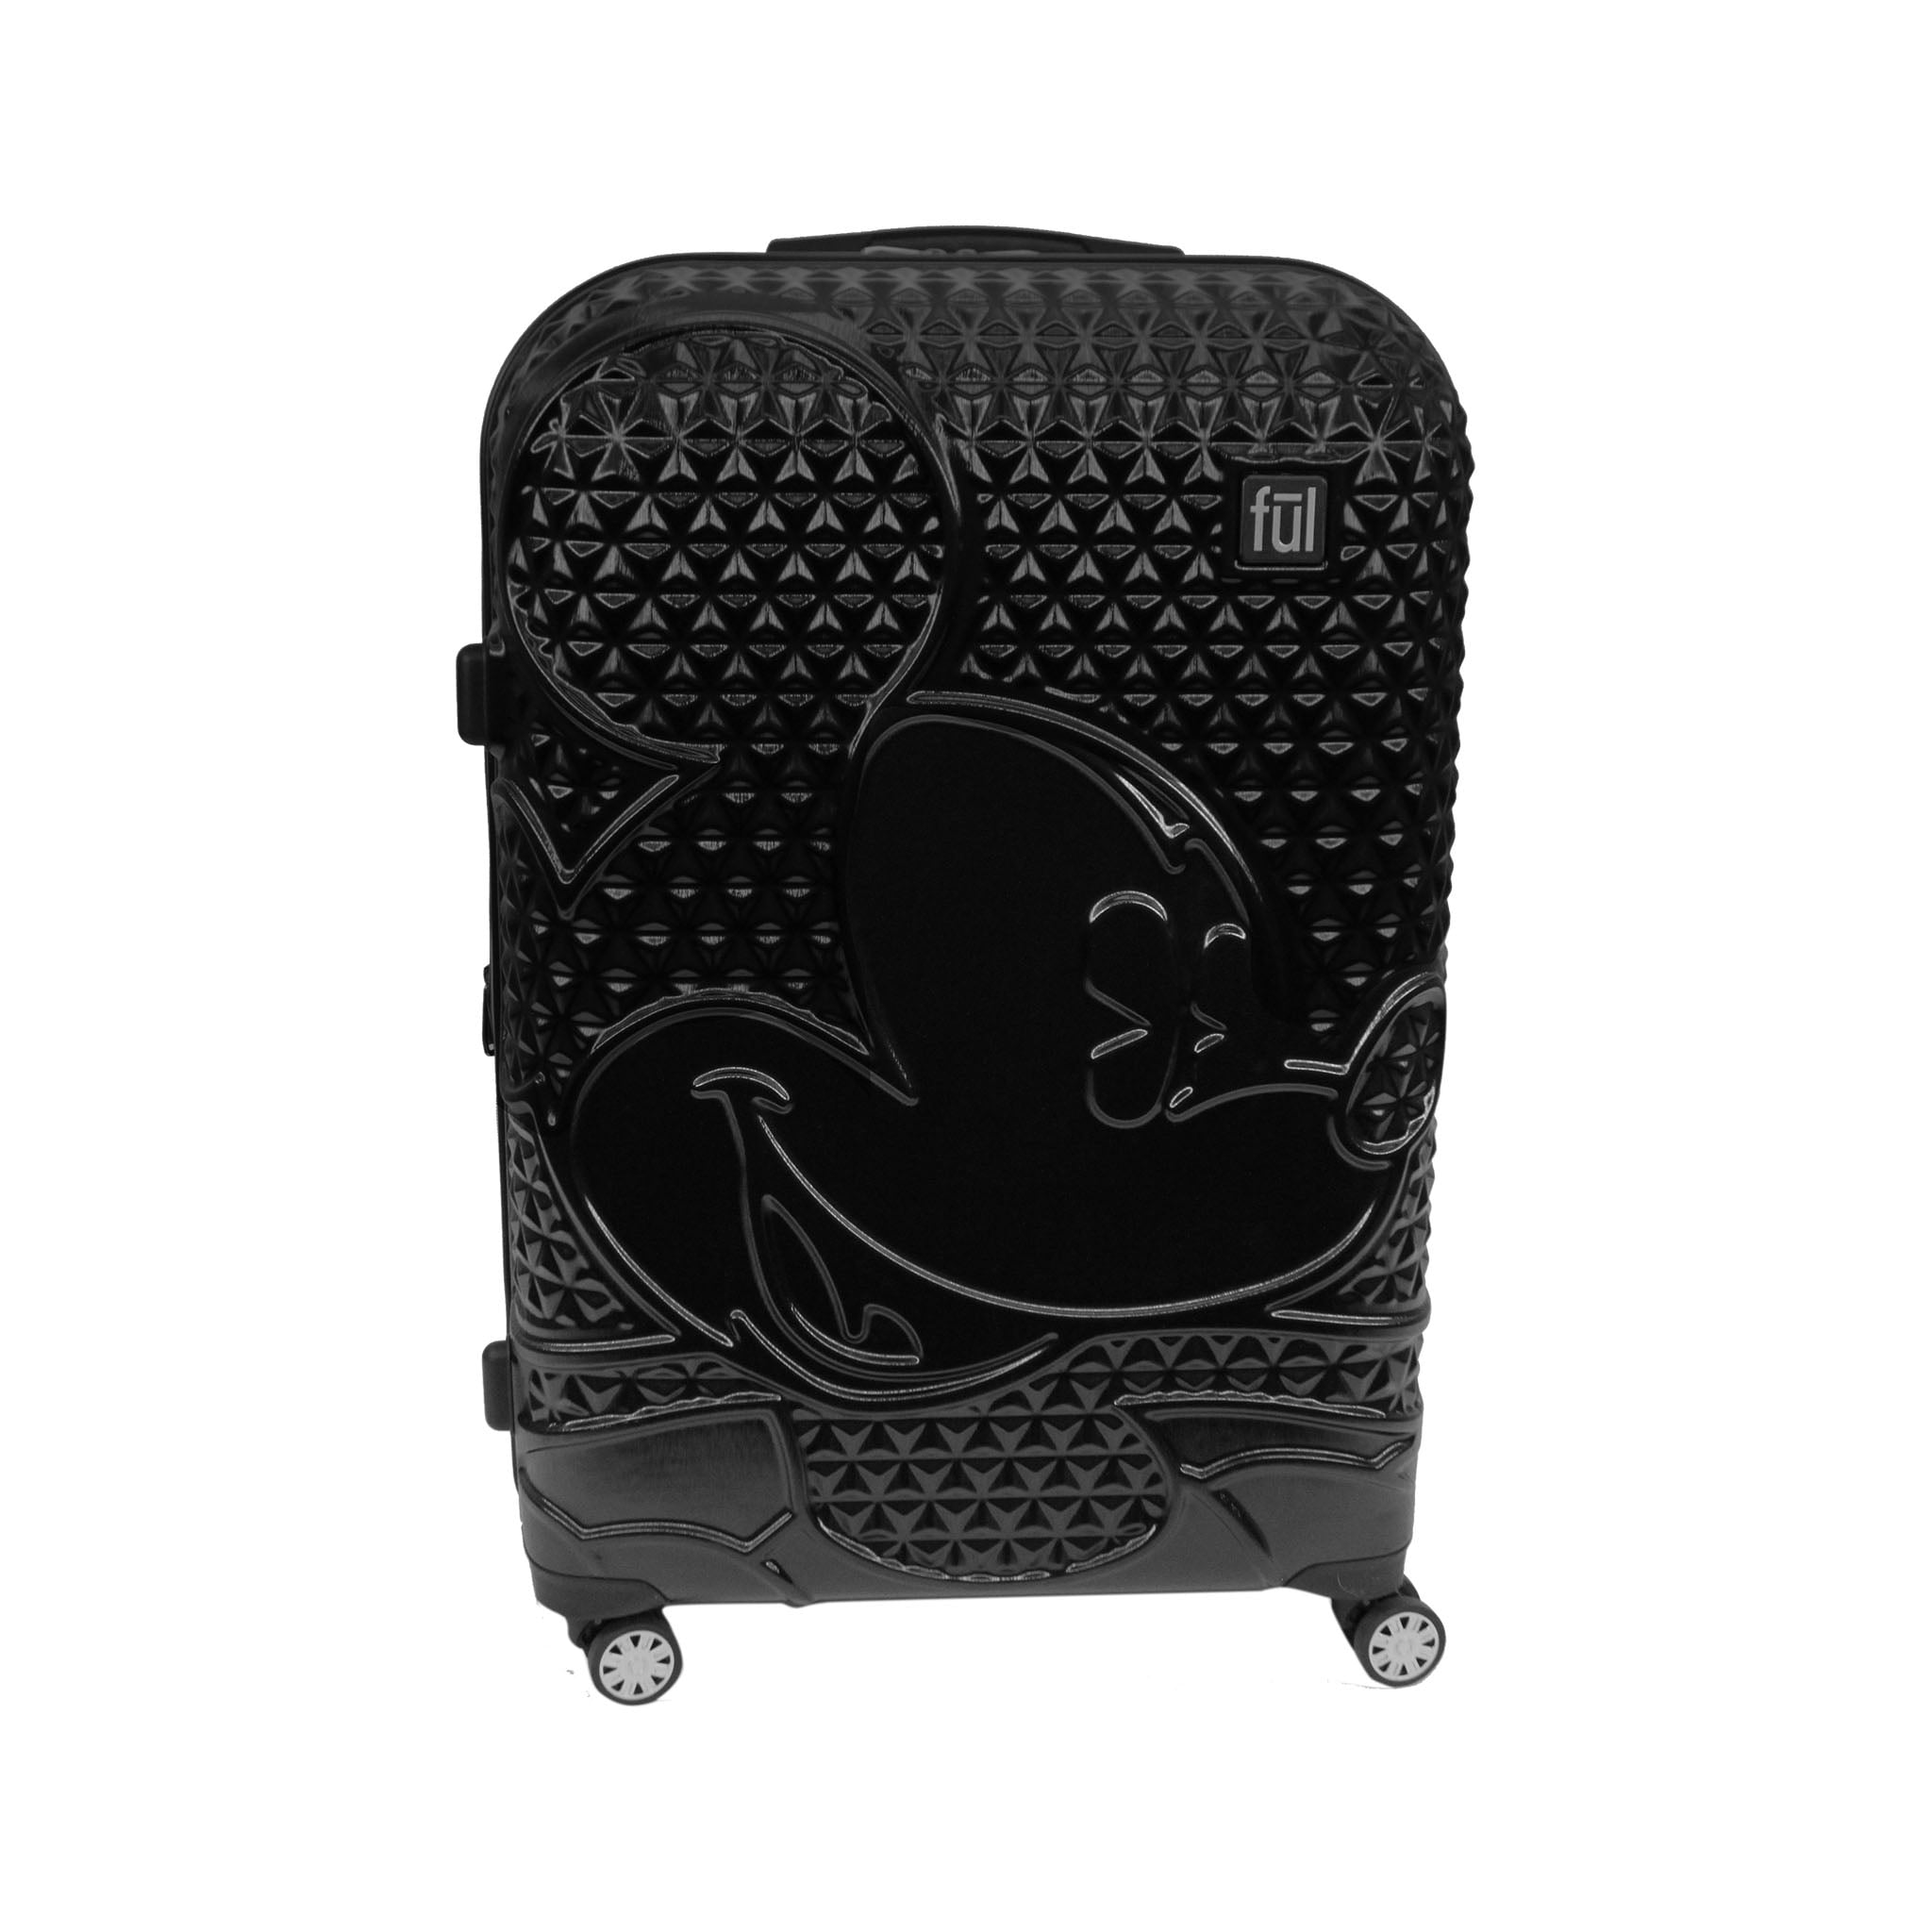 Hardside Suitcase with Spinner Wheels FUL Disney Mickey Mouse 25 Inch Rolling Luggage Black 